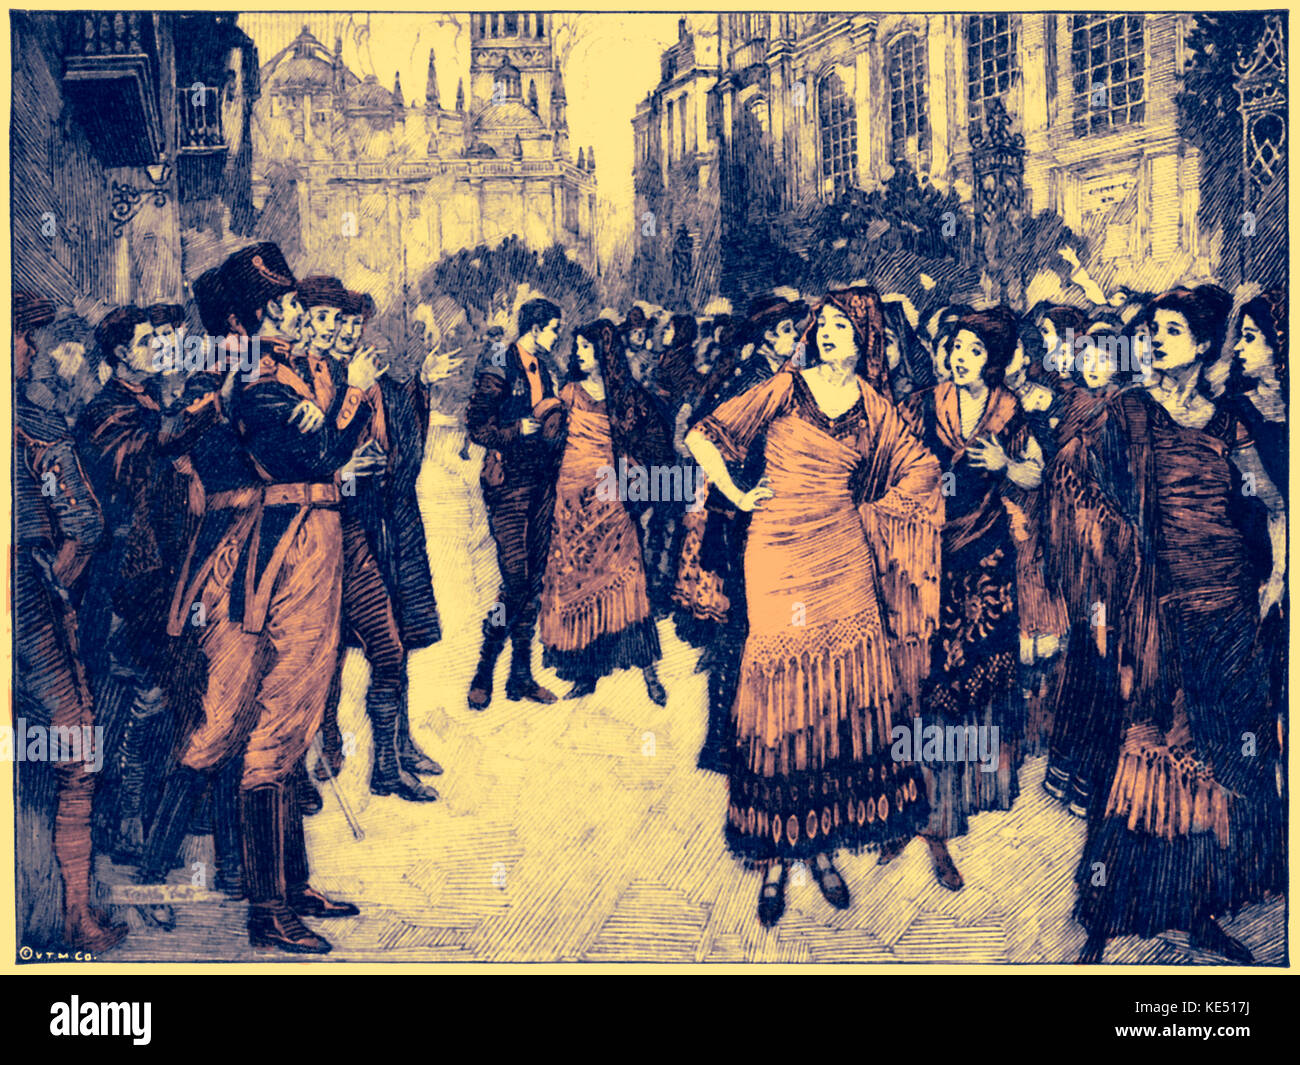 'Carmen' - opera by Georges Bizet. Carmen singing the Habanera aria in the street, 1929. Crowd watching her and applauding.  Scene from Act I. GB, French composer: 25 October 1838 - 3 June 1875. Stock Photo